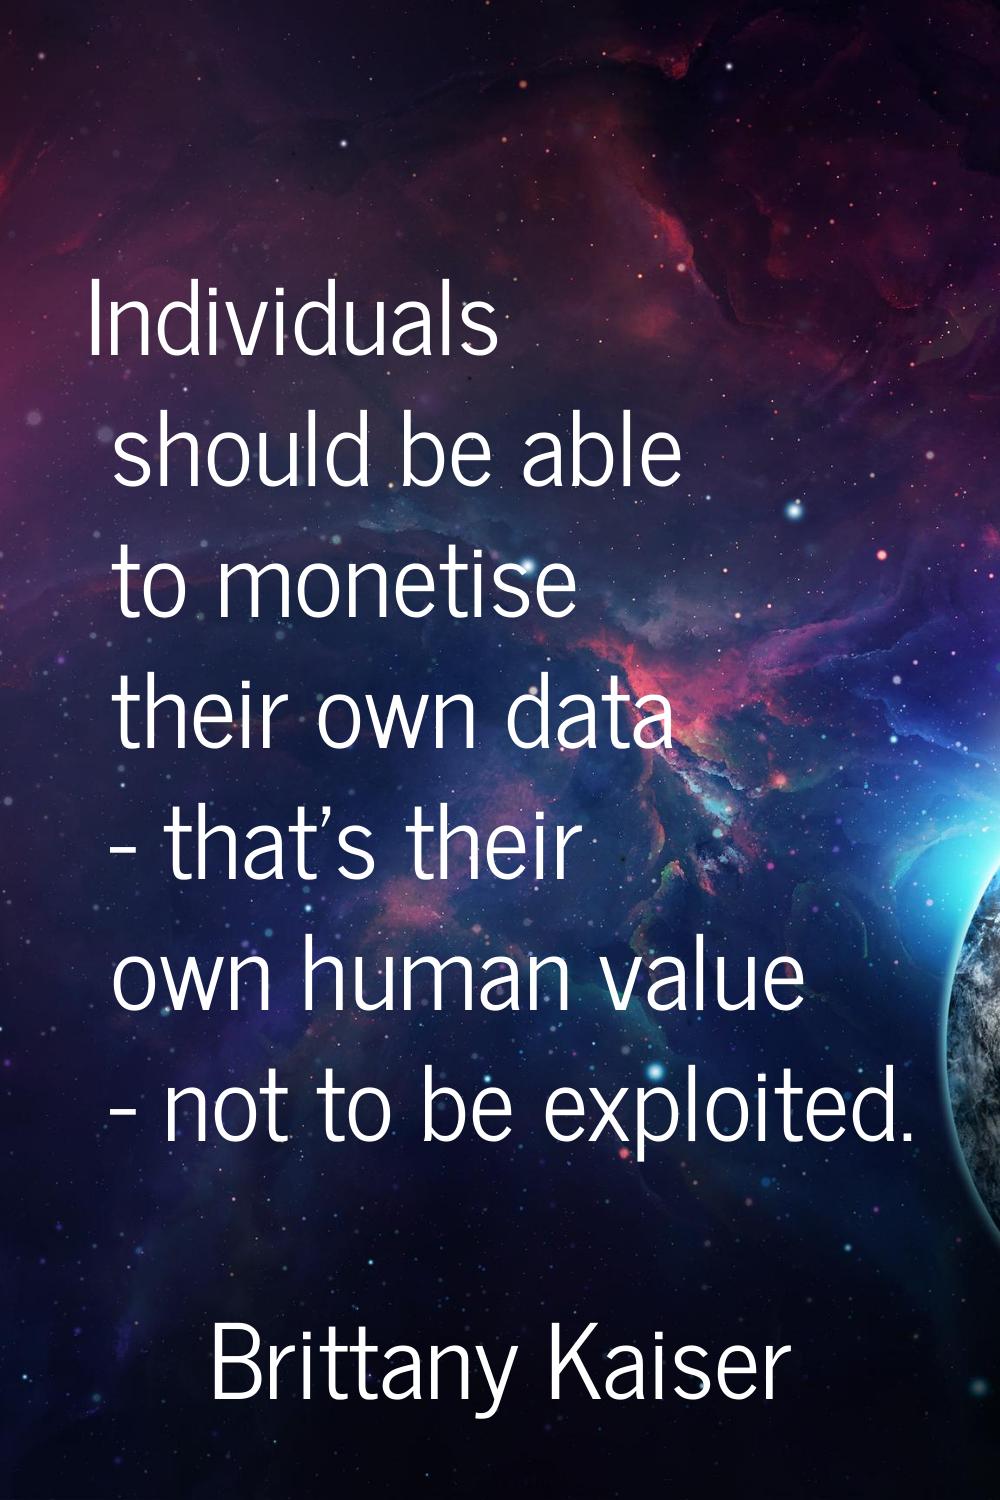 Individuals should be able to monetise their own data - that's their own human value - not to be ex